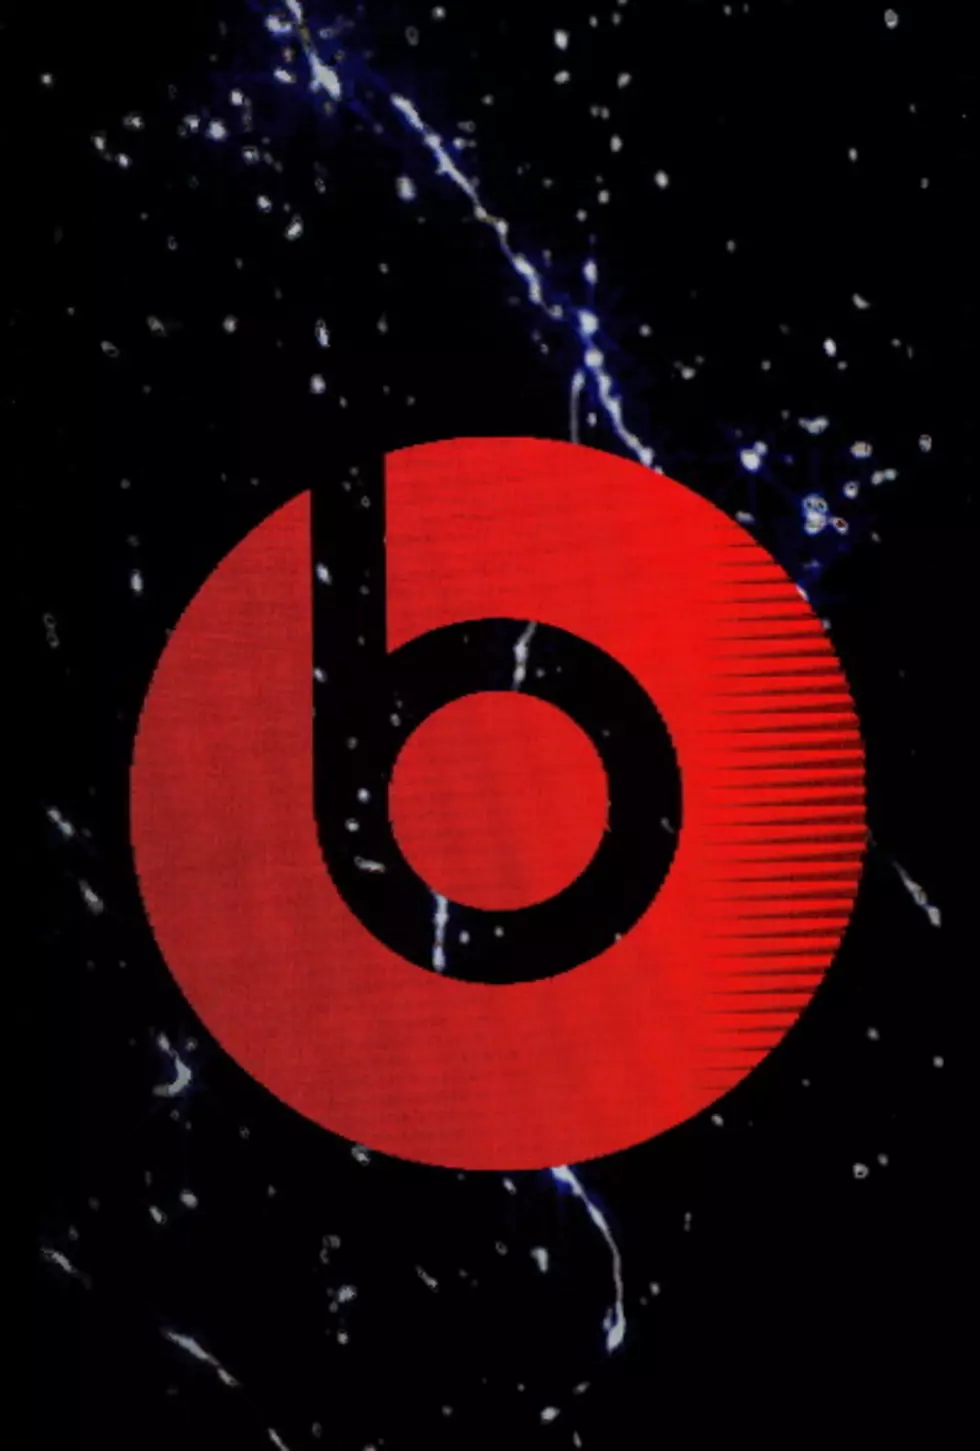 Looking For A New Music Server? Try Beats Music [REVIEW]